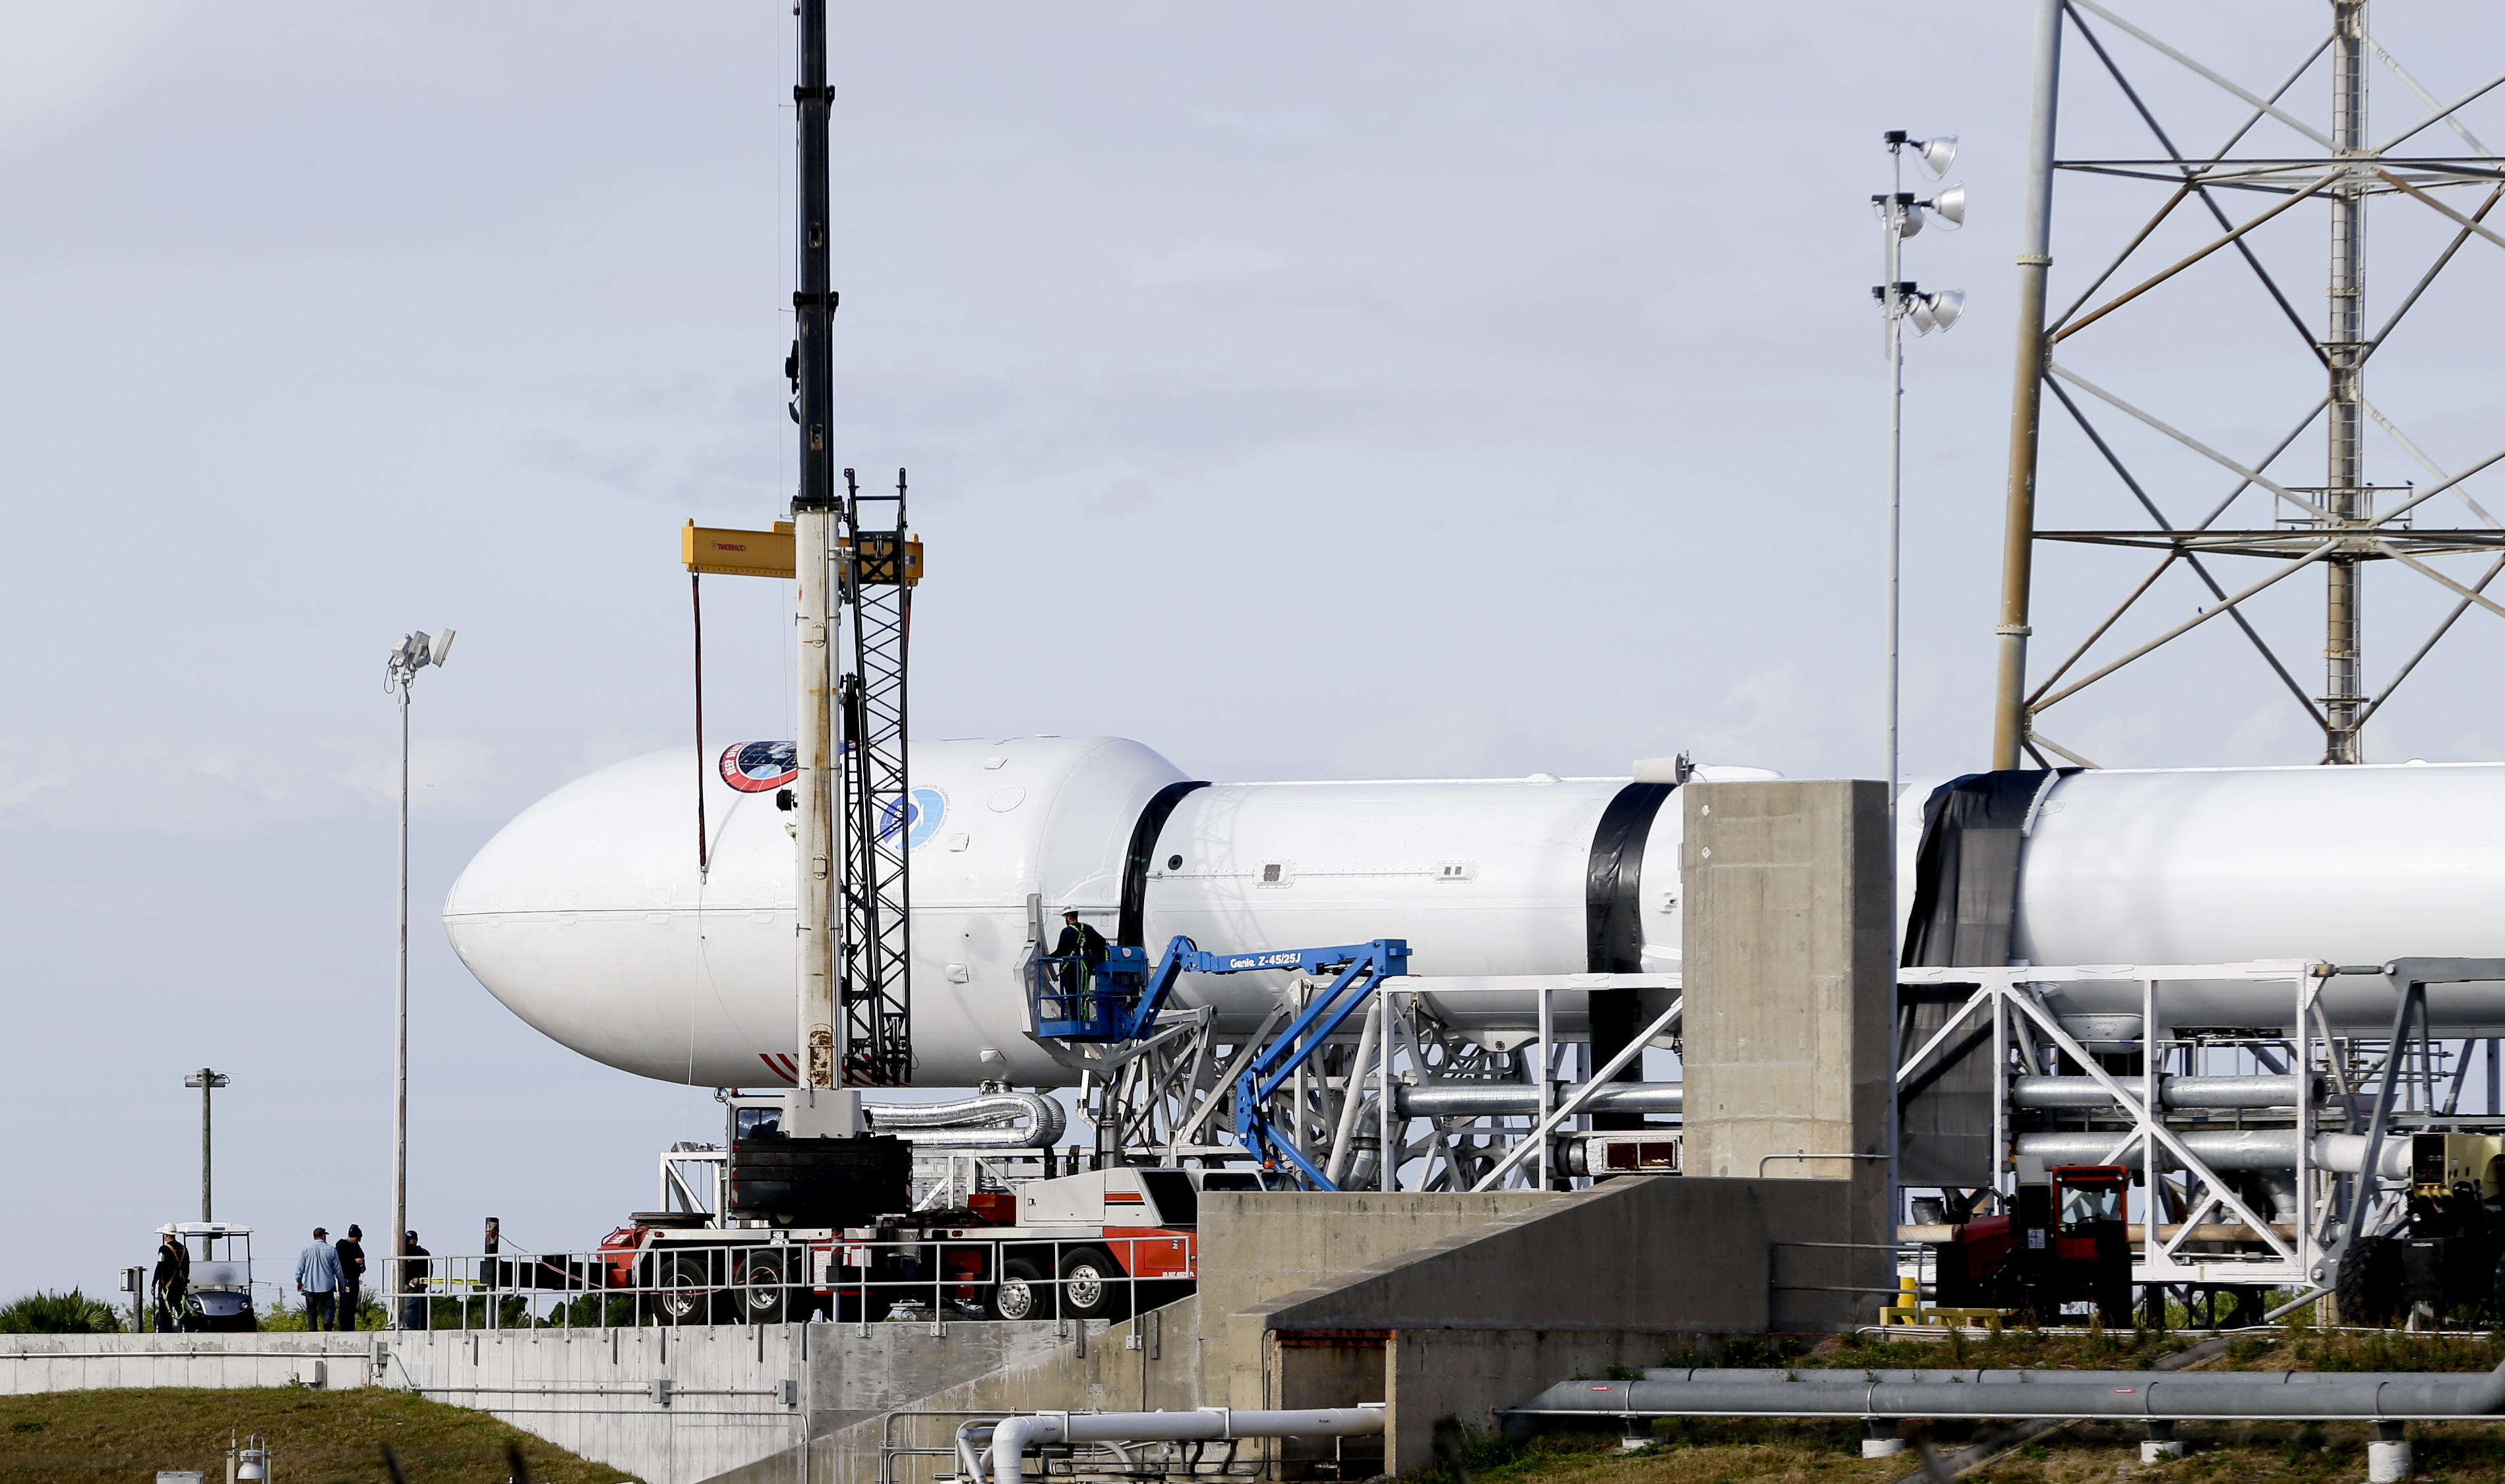 SpaceX tries again to launch observatory, land rocket at sea - The Blade3799 x 2251